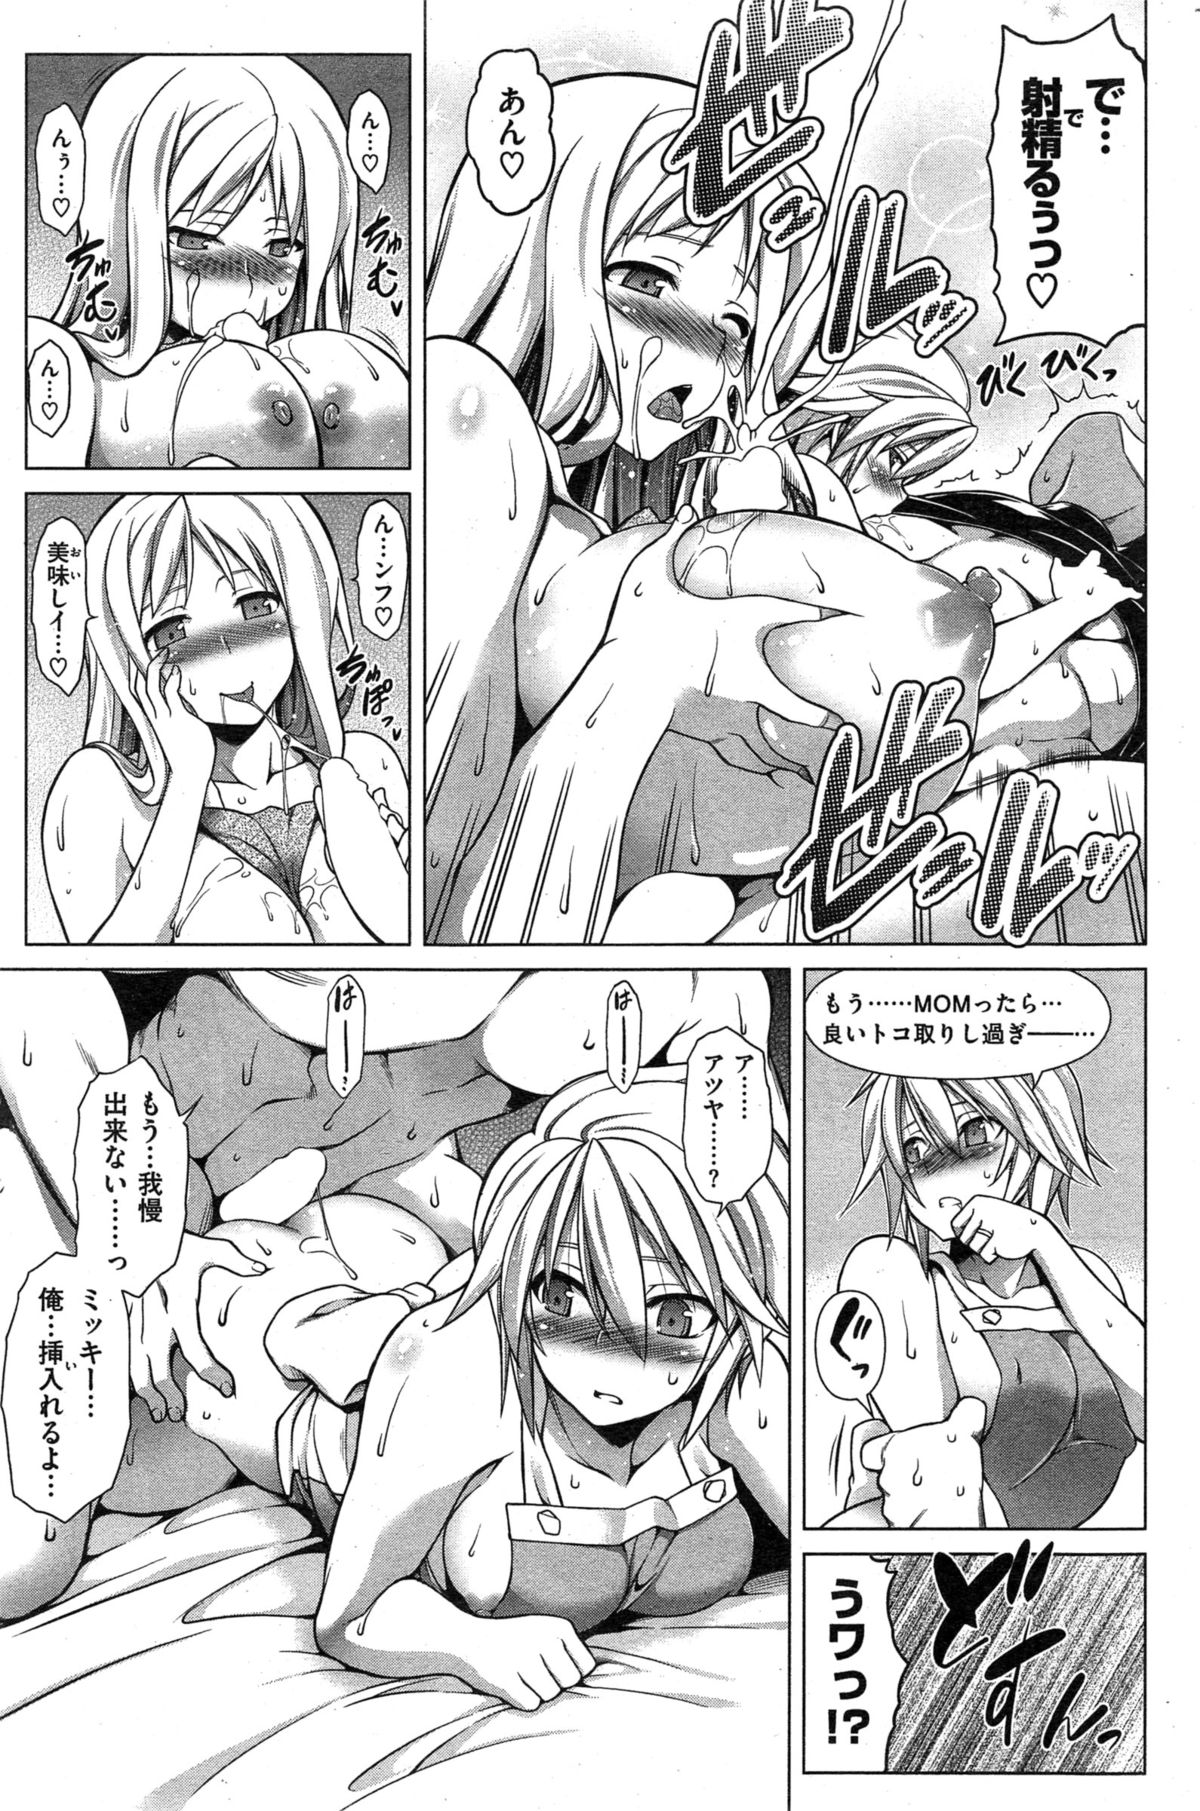 [TANABE] Ougon Taiken - Gold Experience page 29 full